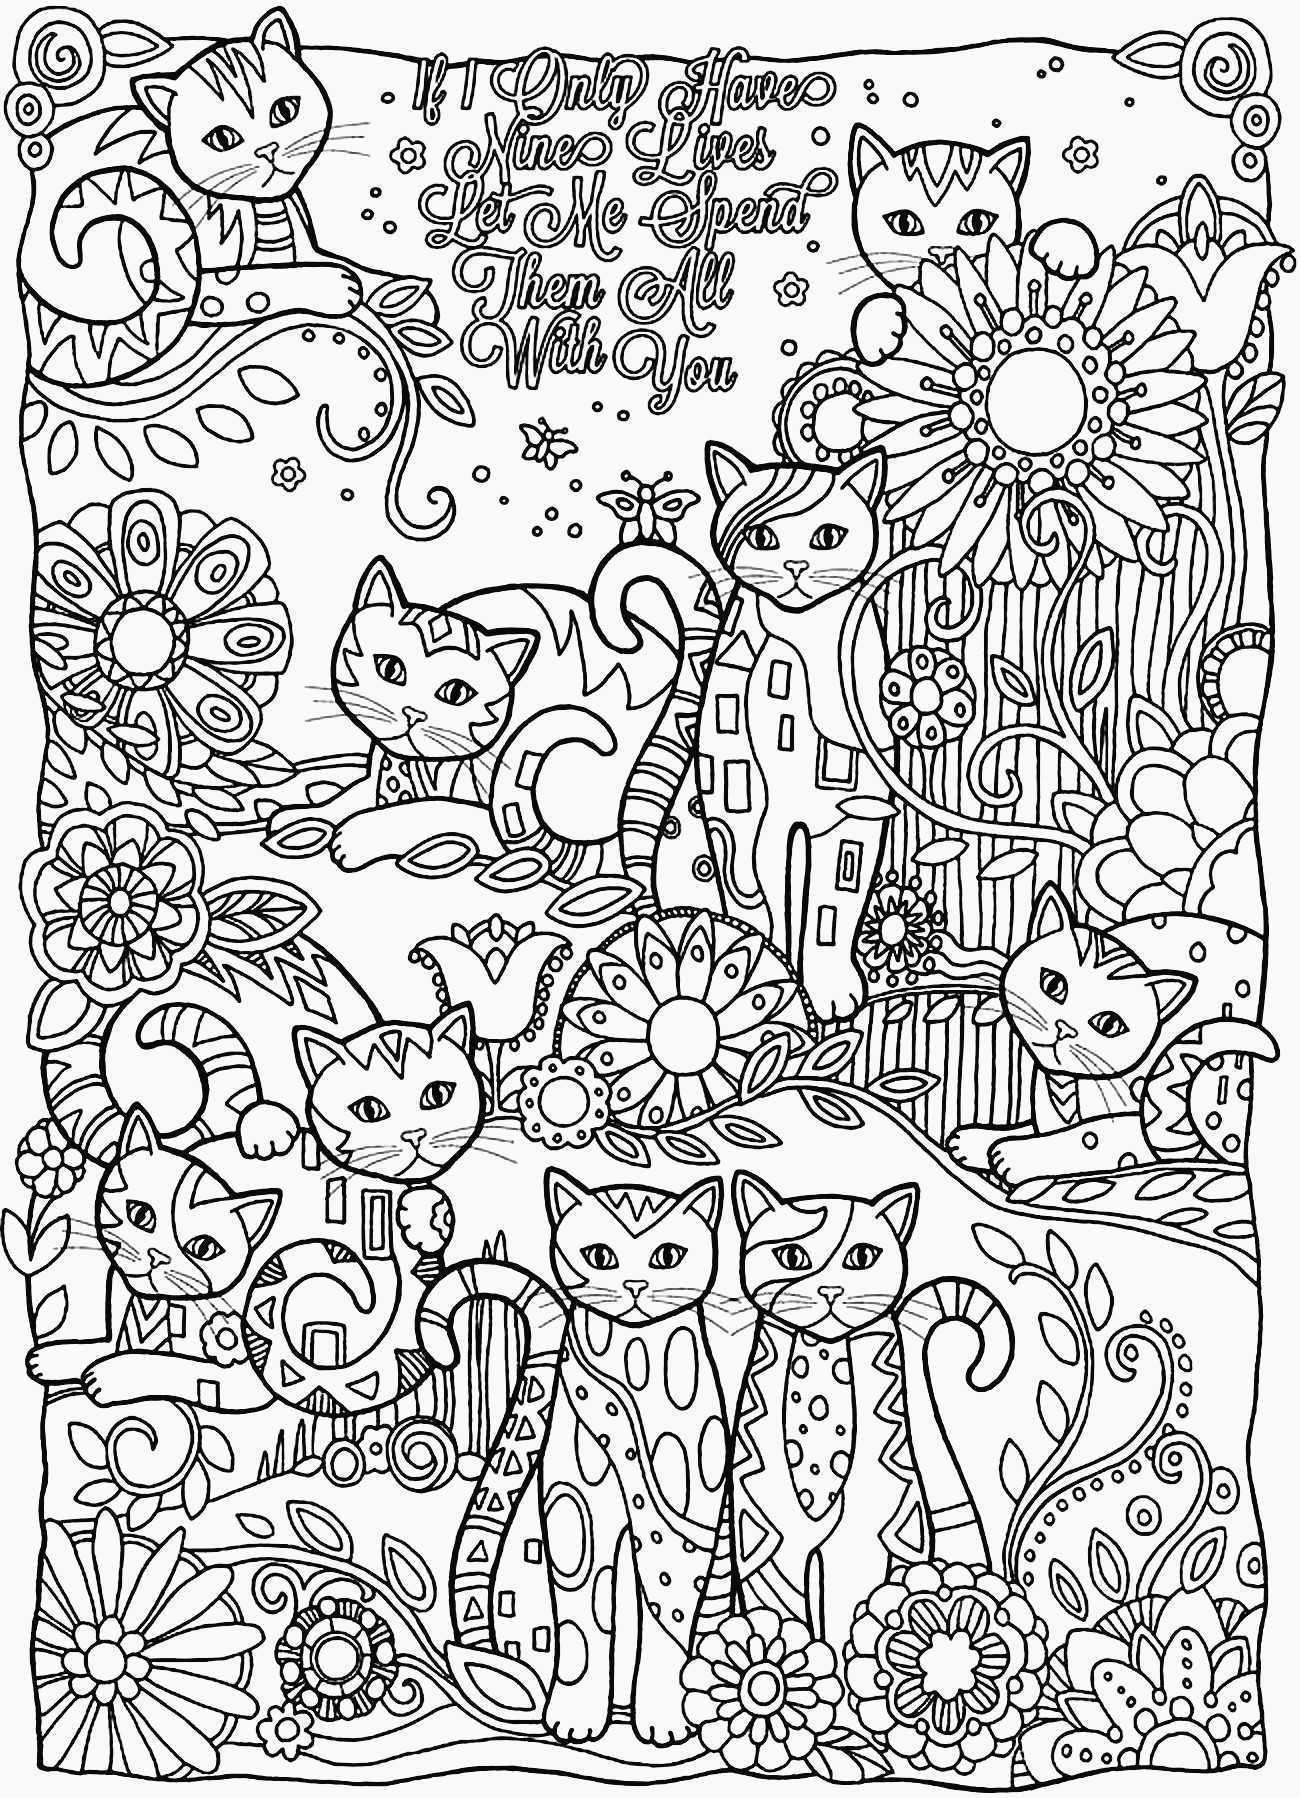 Growing Patterns Worksheets and Free Math Coloring Worksheets Fun Coloring Pages to Print